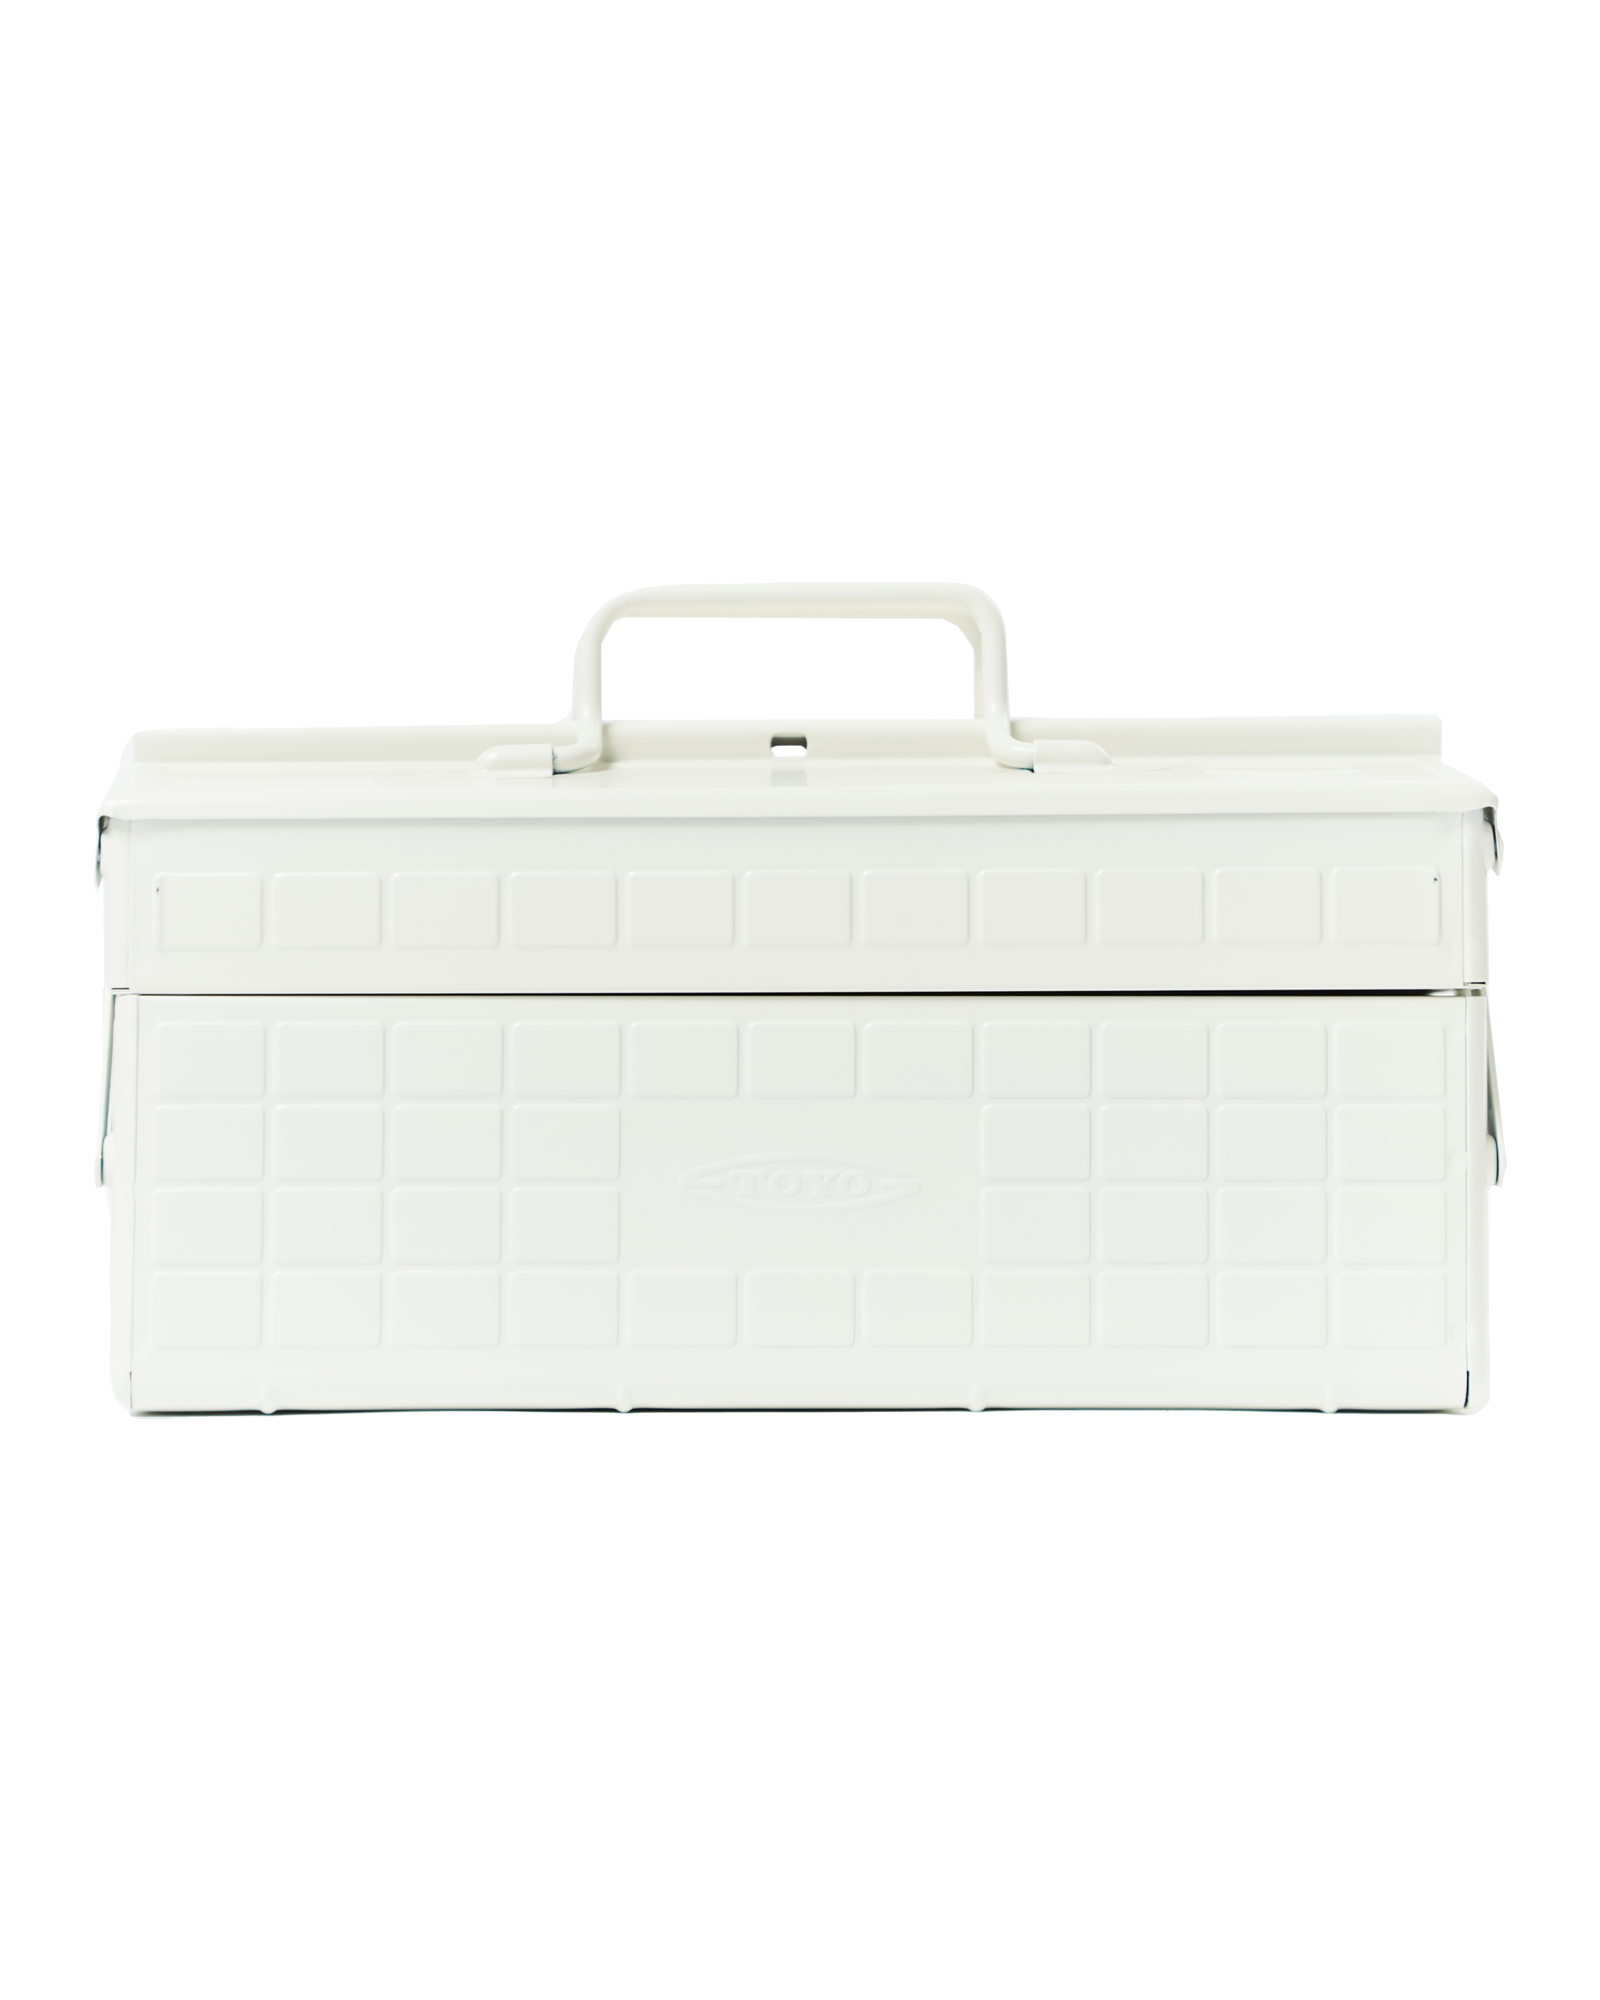 TOYO Cantilever Toolbox ST-350 (White)